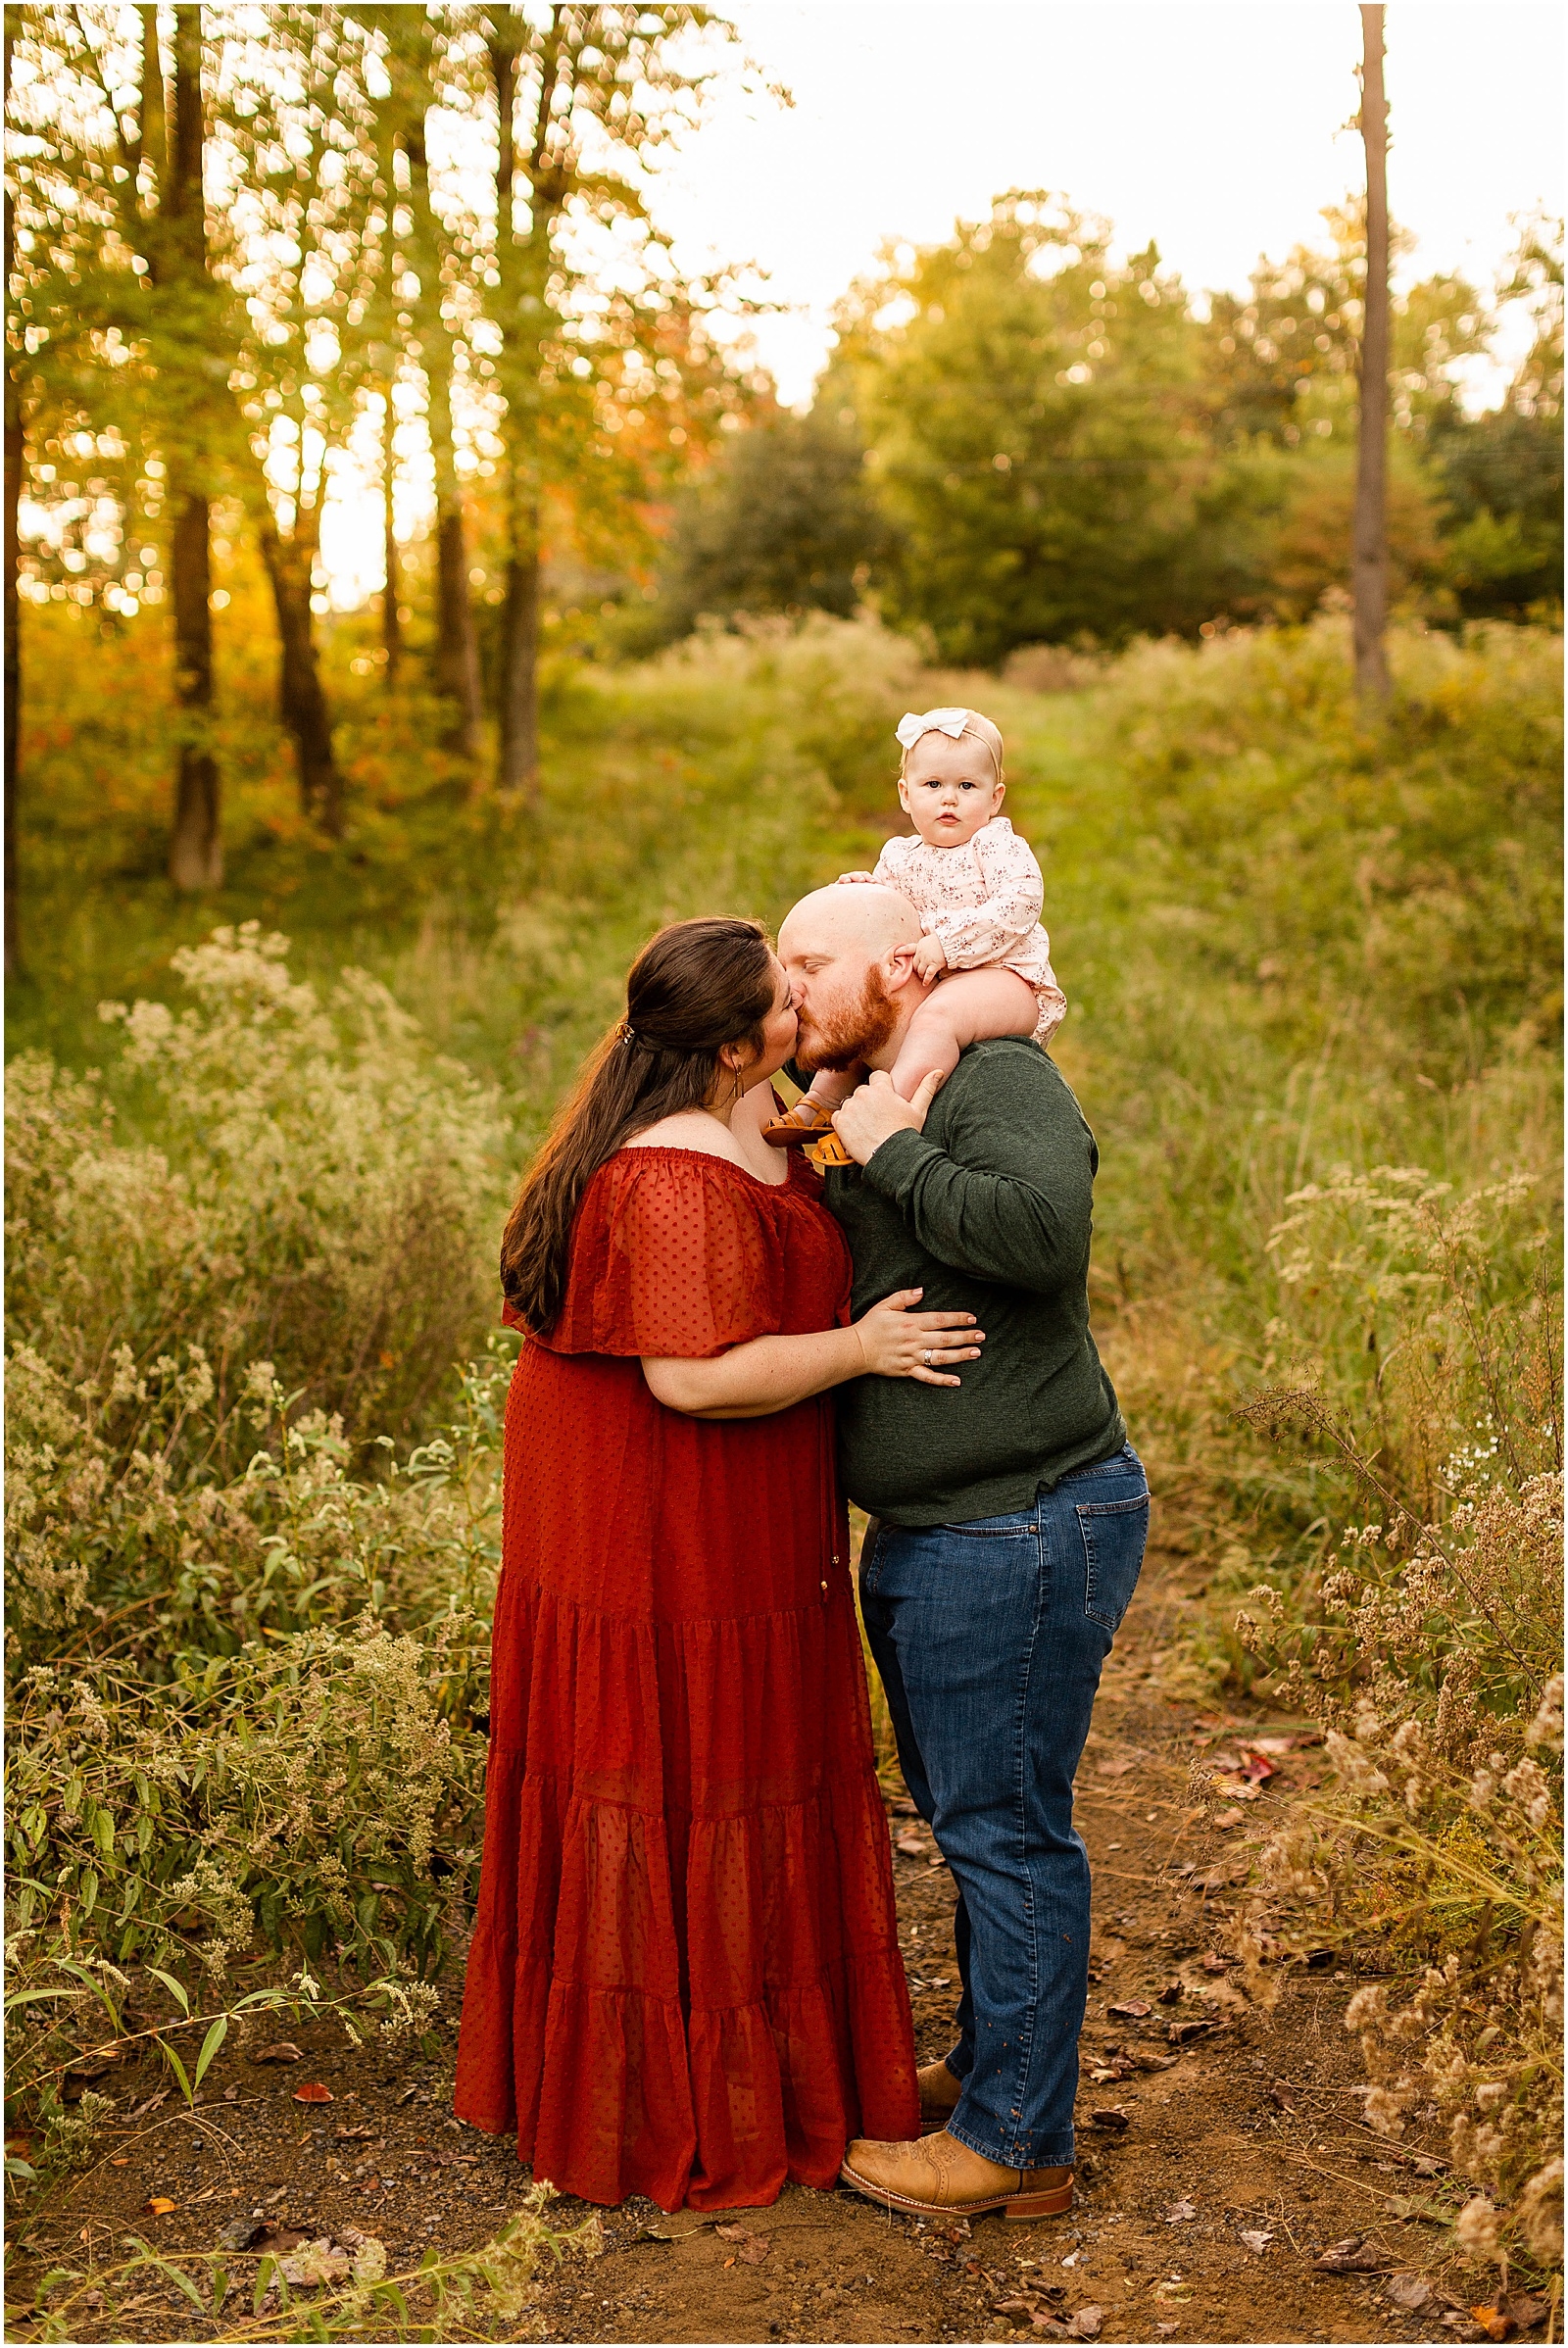 The Peck's Fall Family Session Bret and Brandie Photography | Evansville Indiana Wedding Photographers_0043.jpg